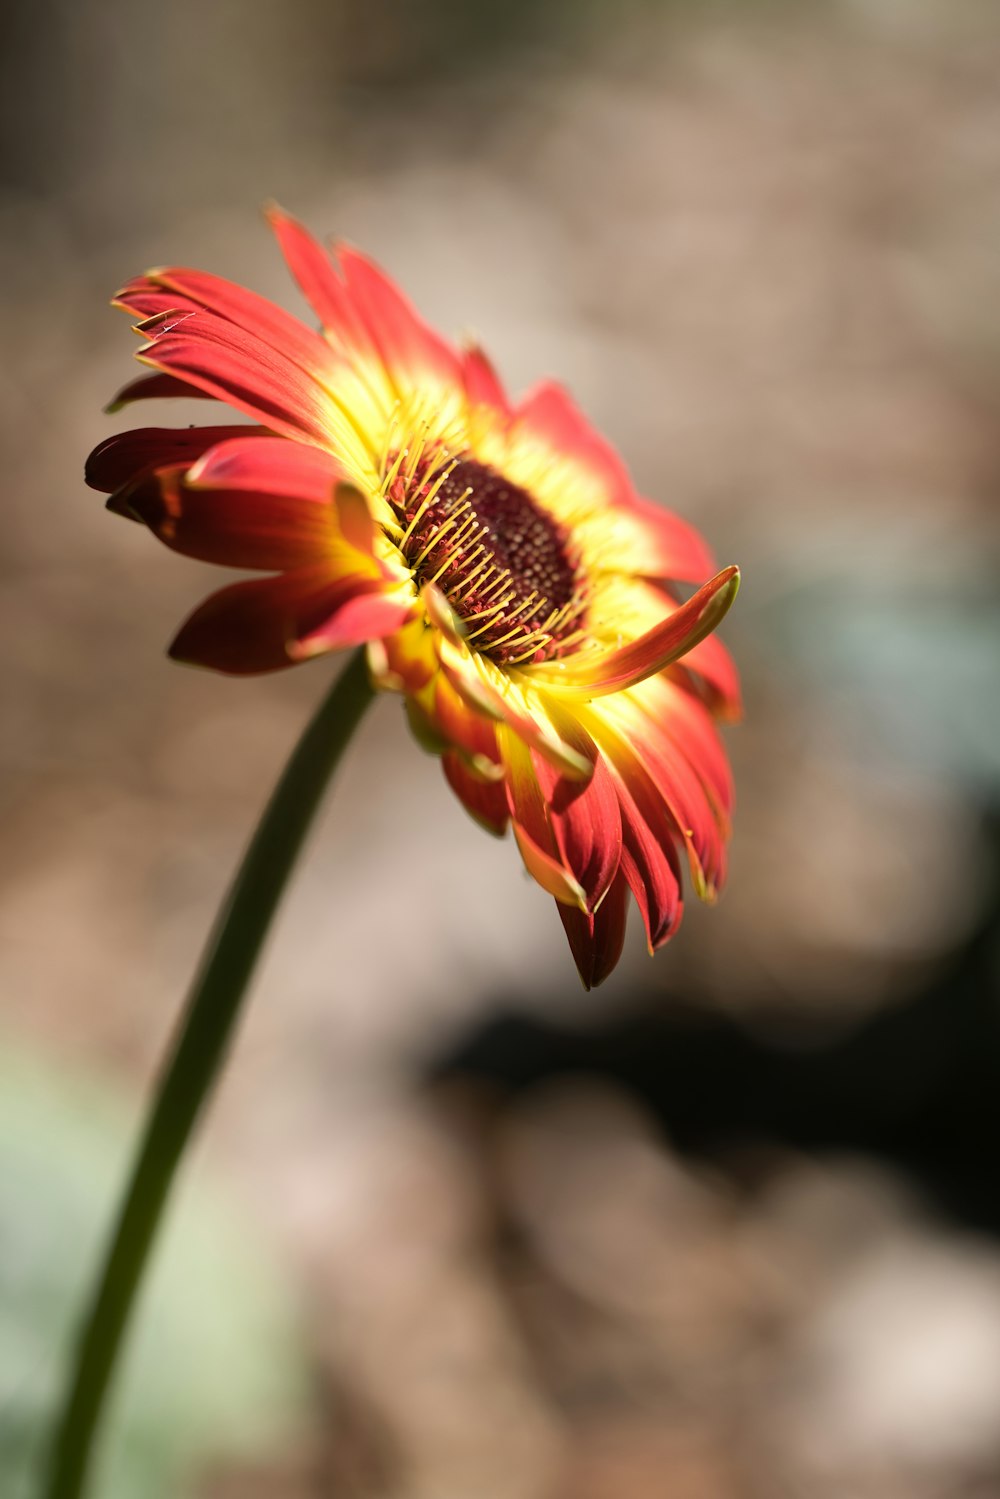 a red and yellow flower with a blurry background